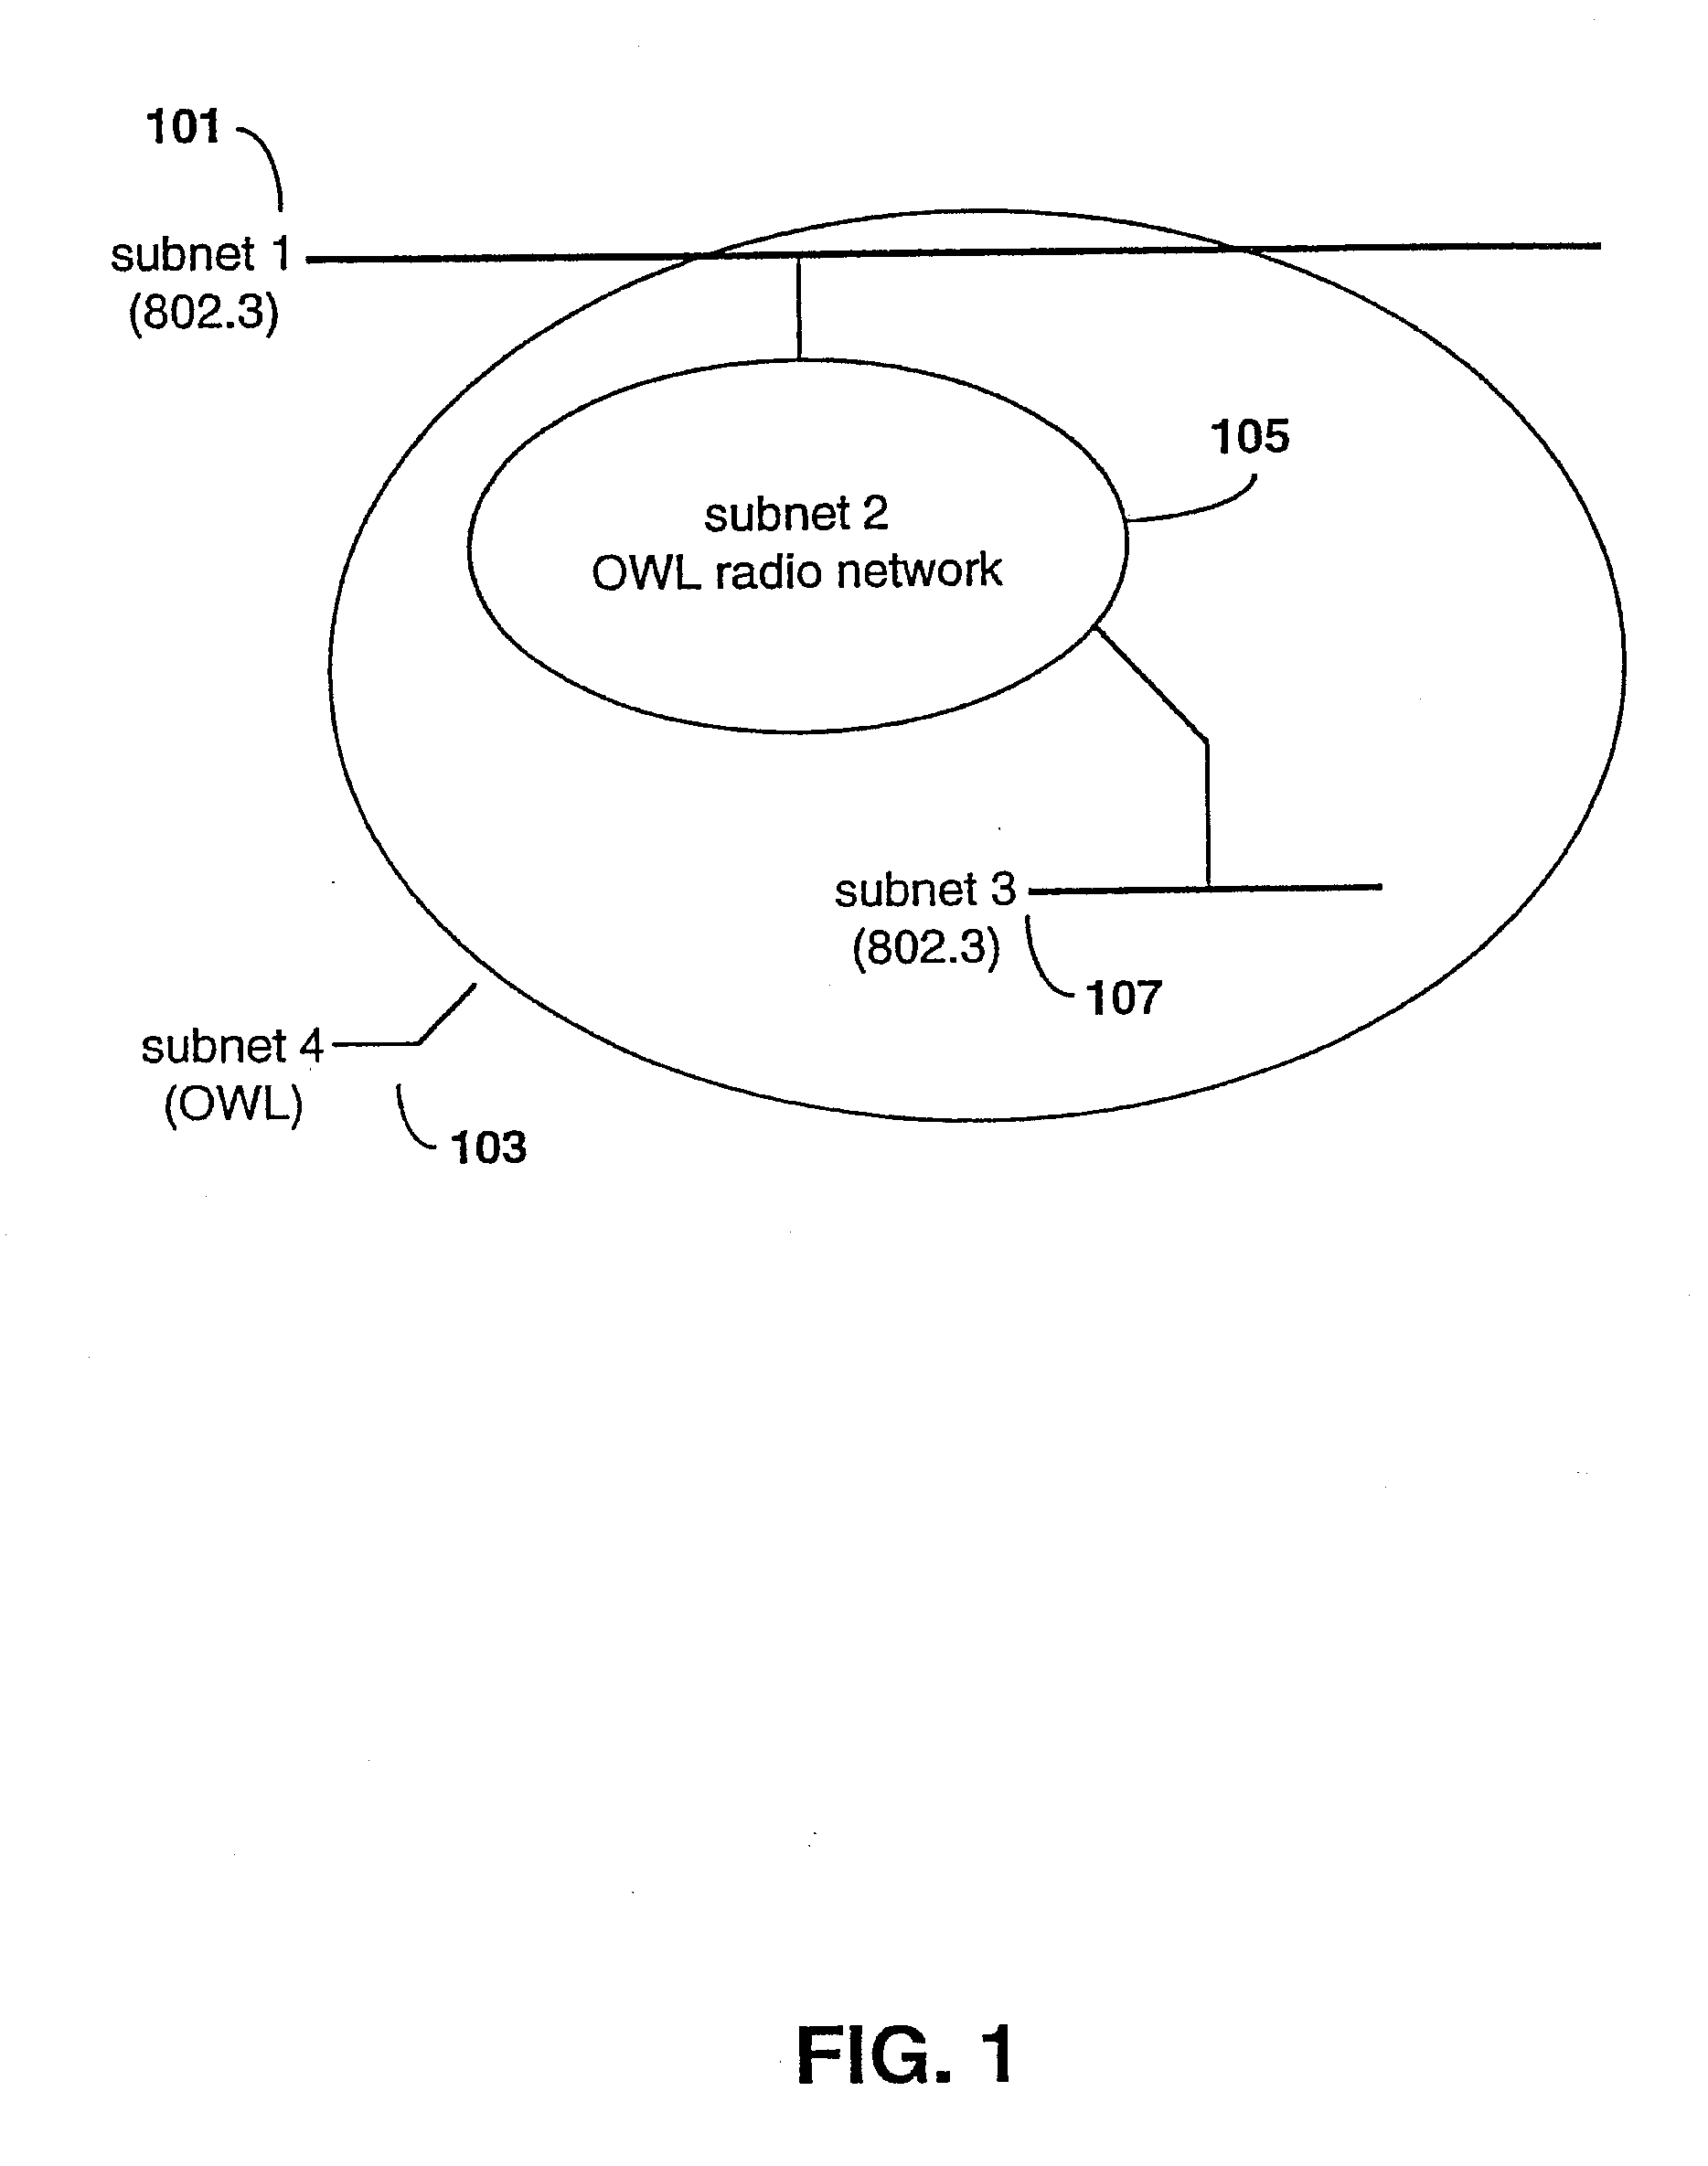 Communication network providing wireless and hard-wired dynamic routing